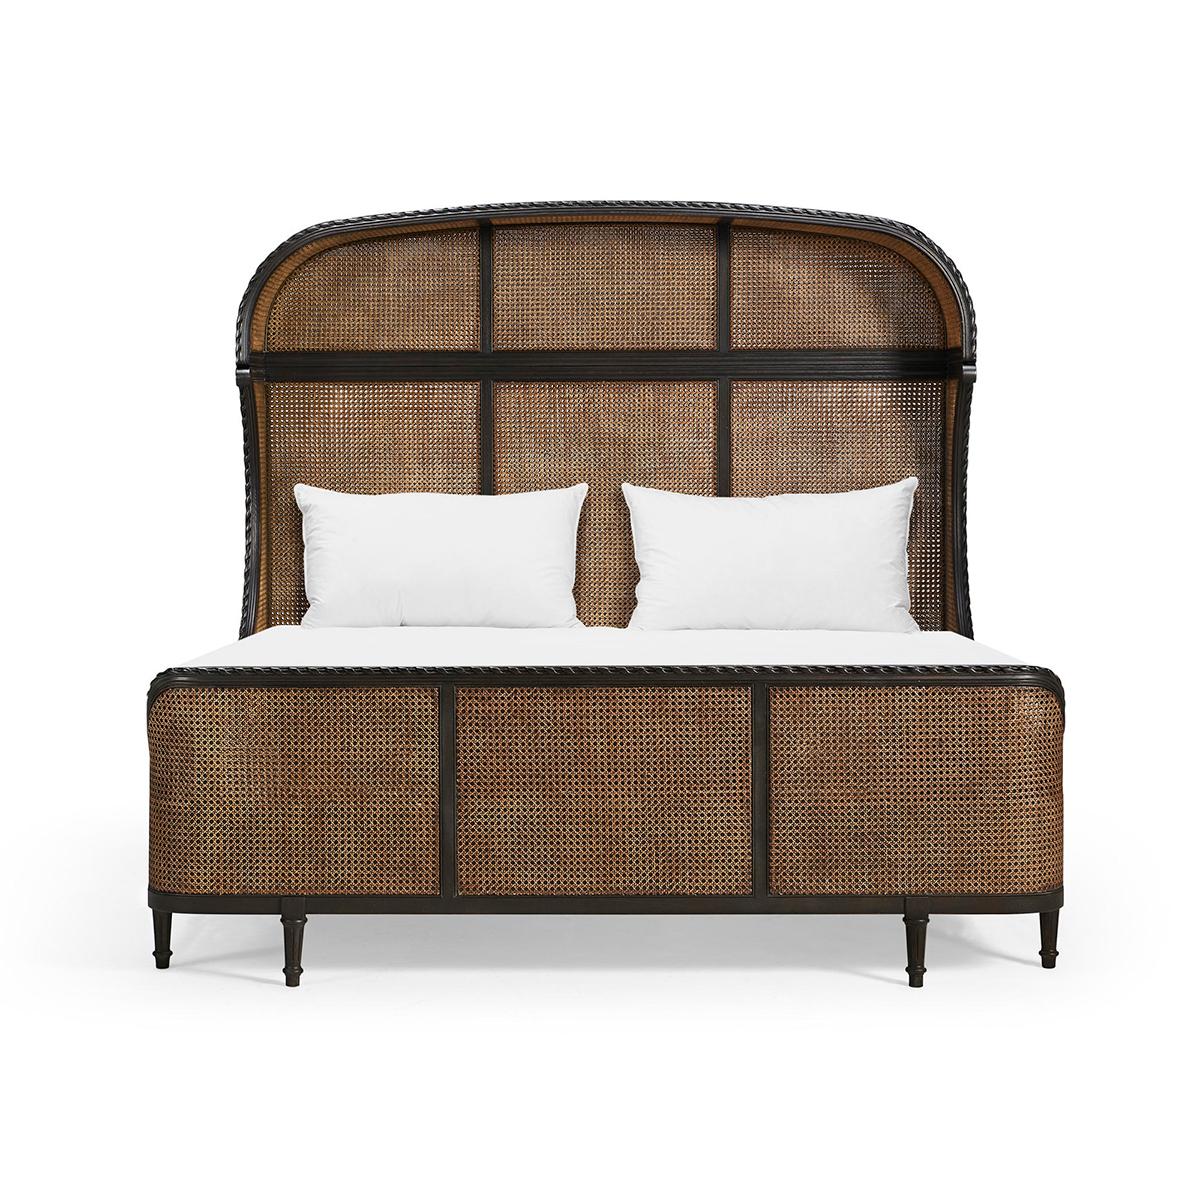 Featuring an ebonized, carved oak frame and an iconic Bonnet-style headboard, this bed radiates sophistication and elegance.

The natural cane is meticulously woven on both sides of the headboard, footboard, and side rails, infusing a touch of